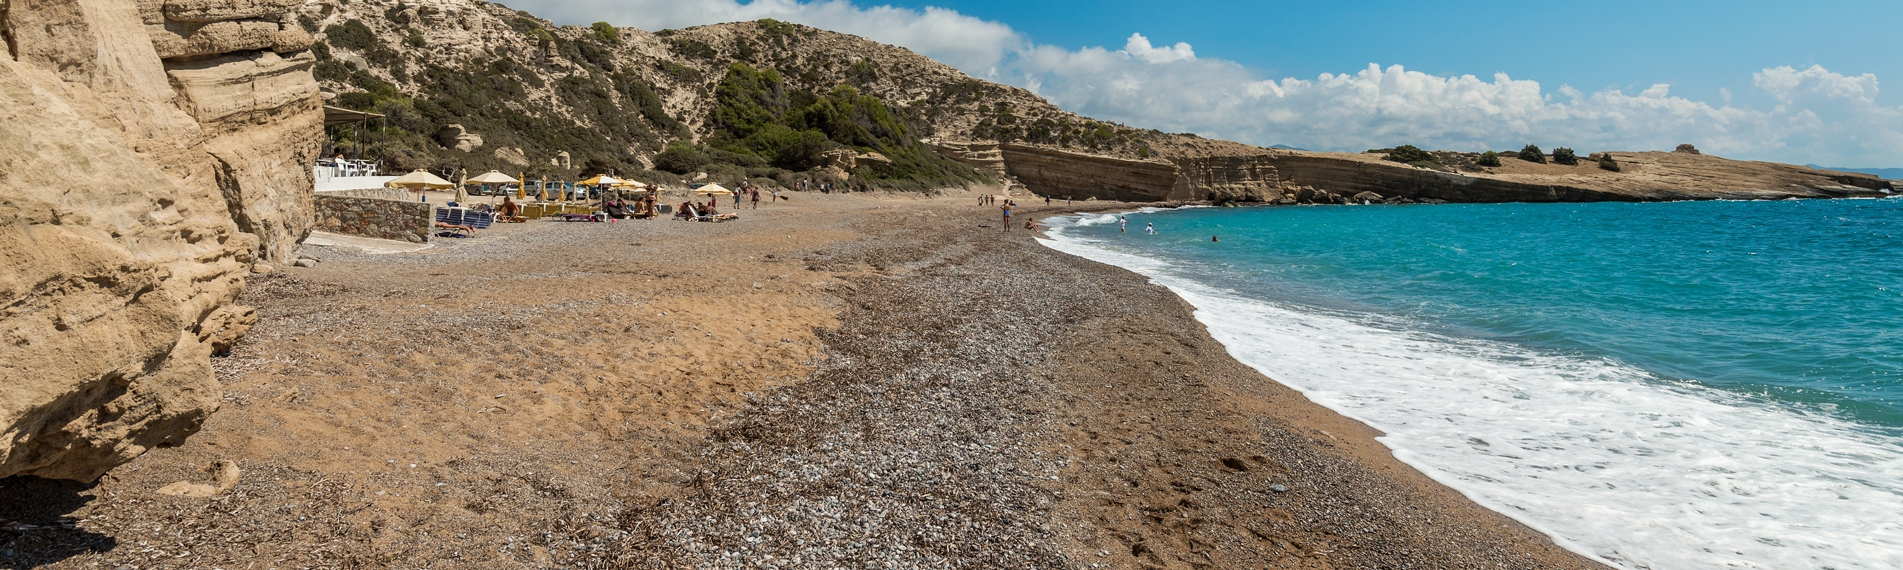 A Sandy beach on the island of Fourni in the North East Aegean